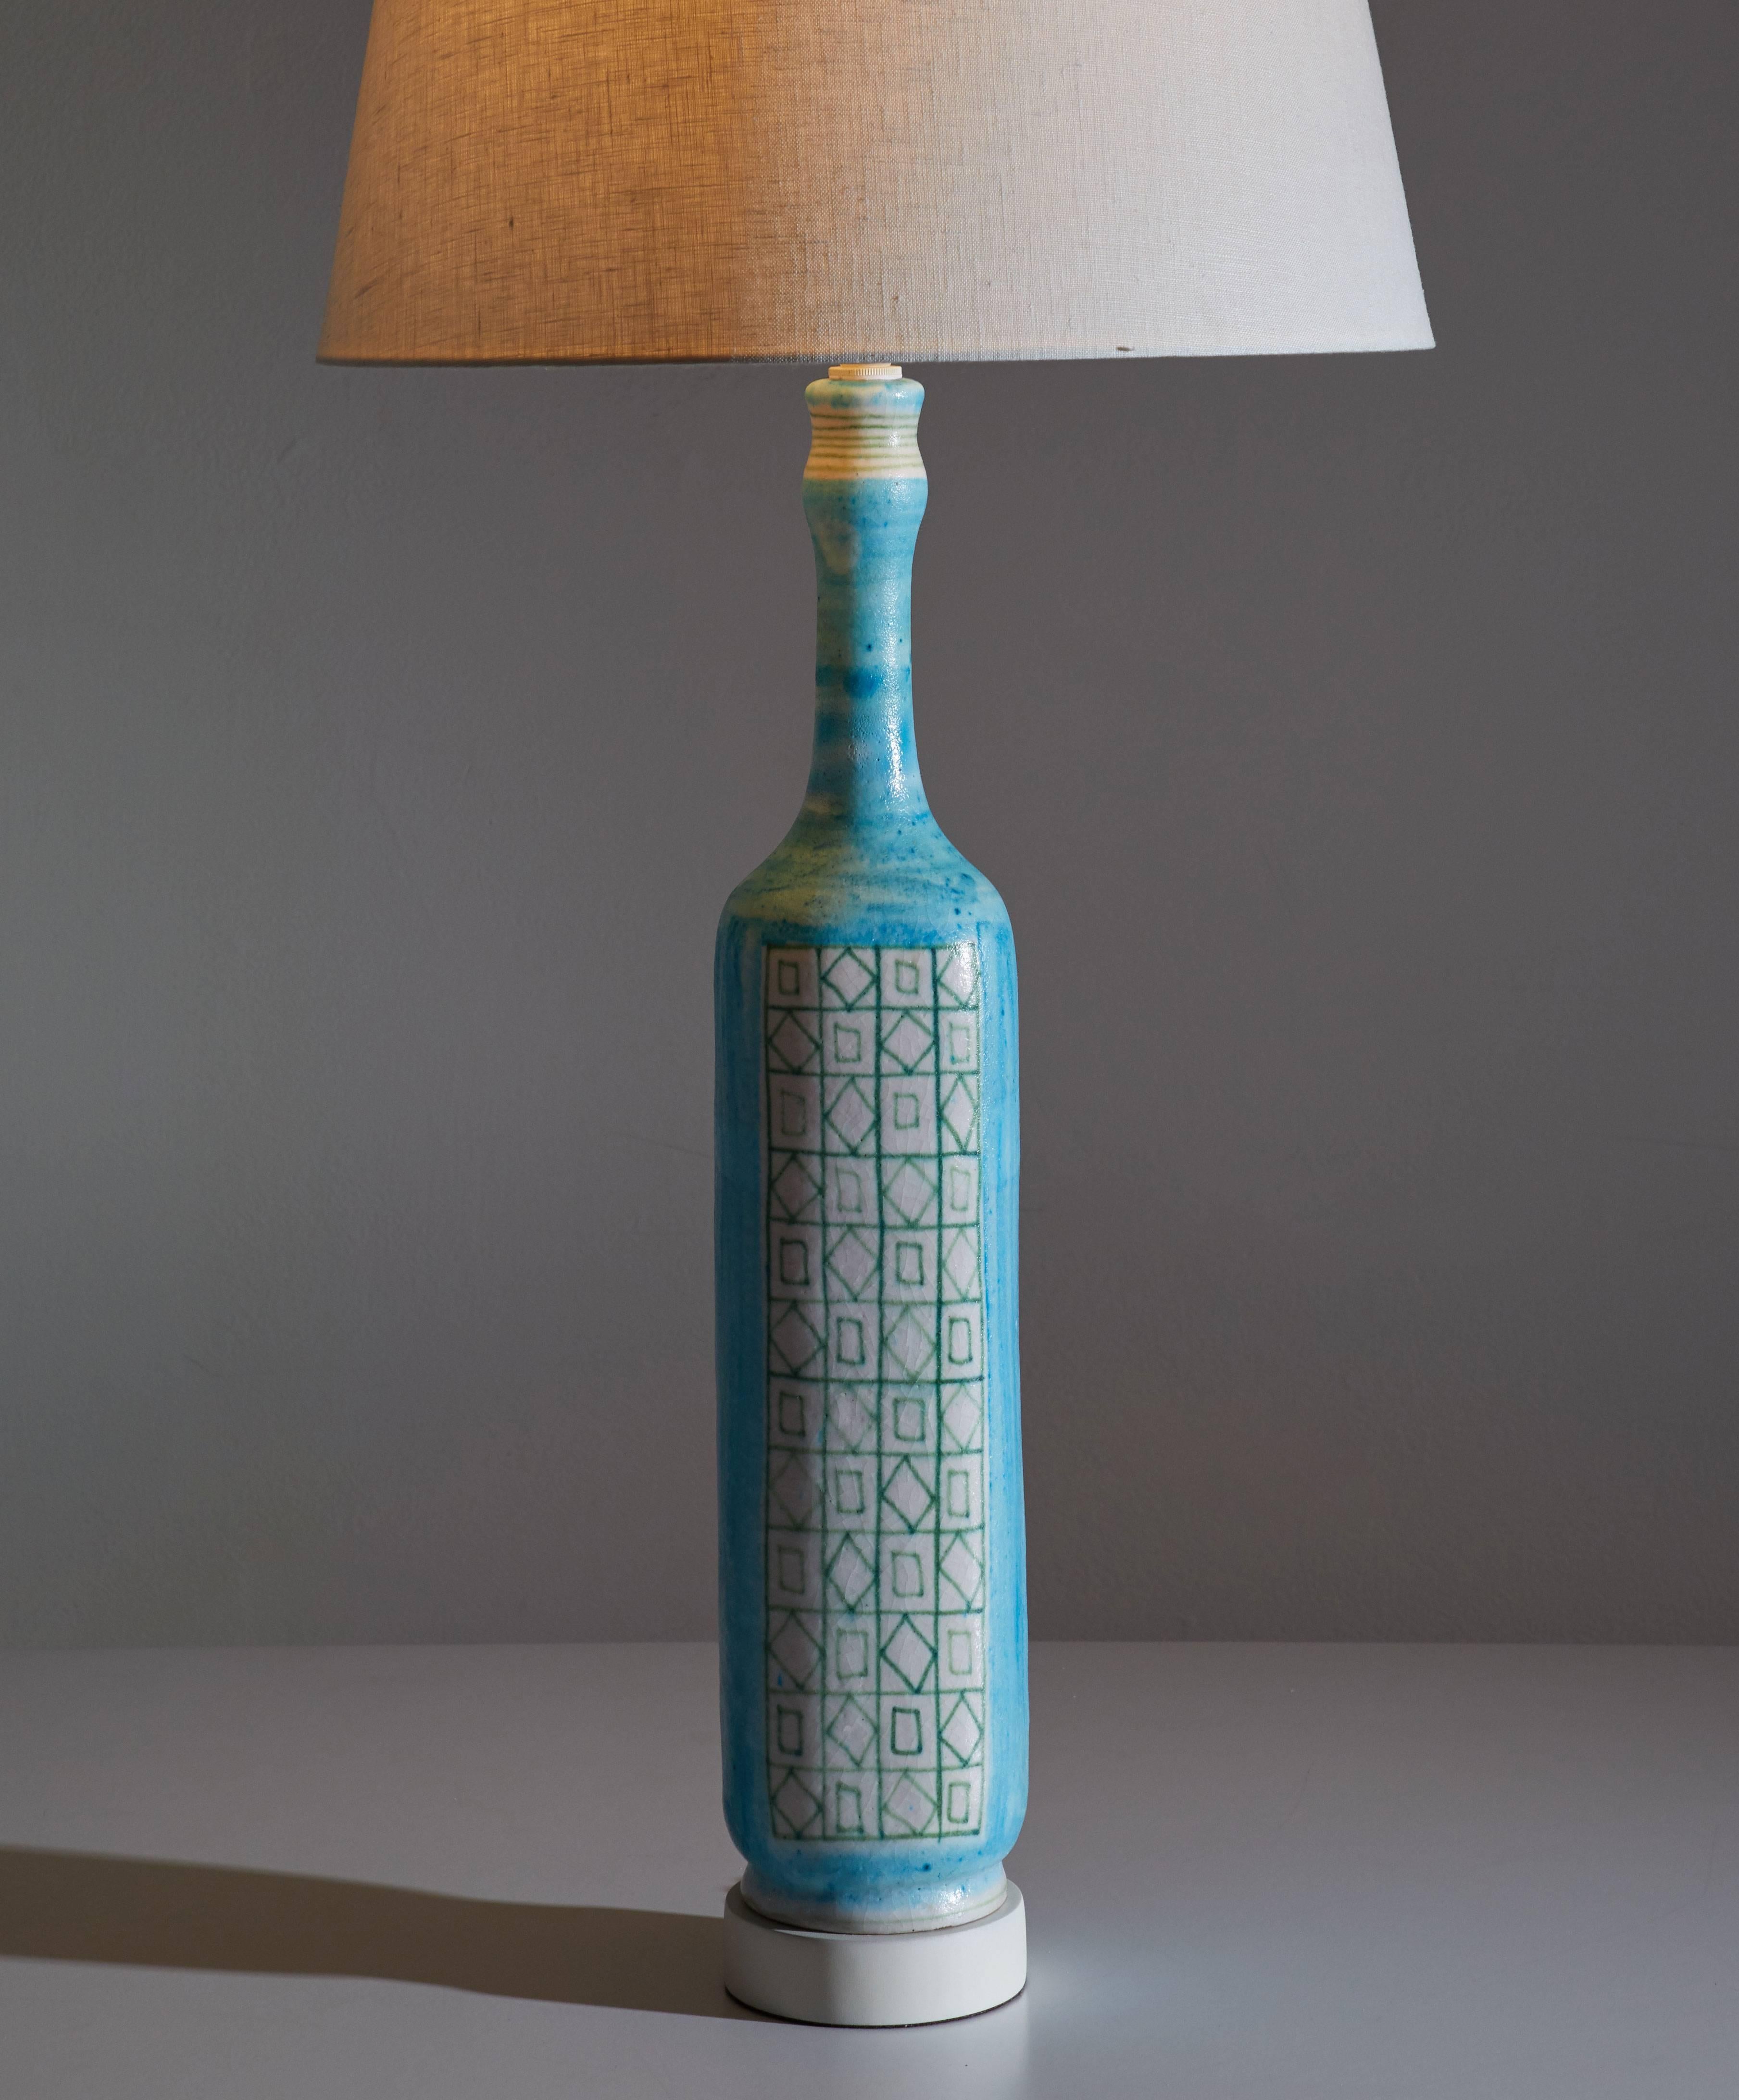 Guido Gambone table lamp.
Italian 1950s handmade Ceramic with painted wood and brass base. Signature on base
One 75w E-26.

